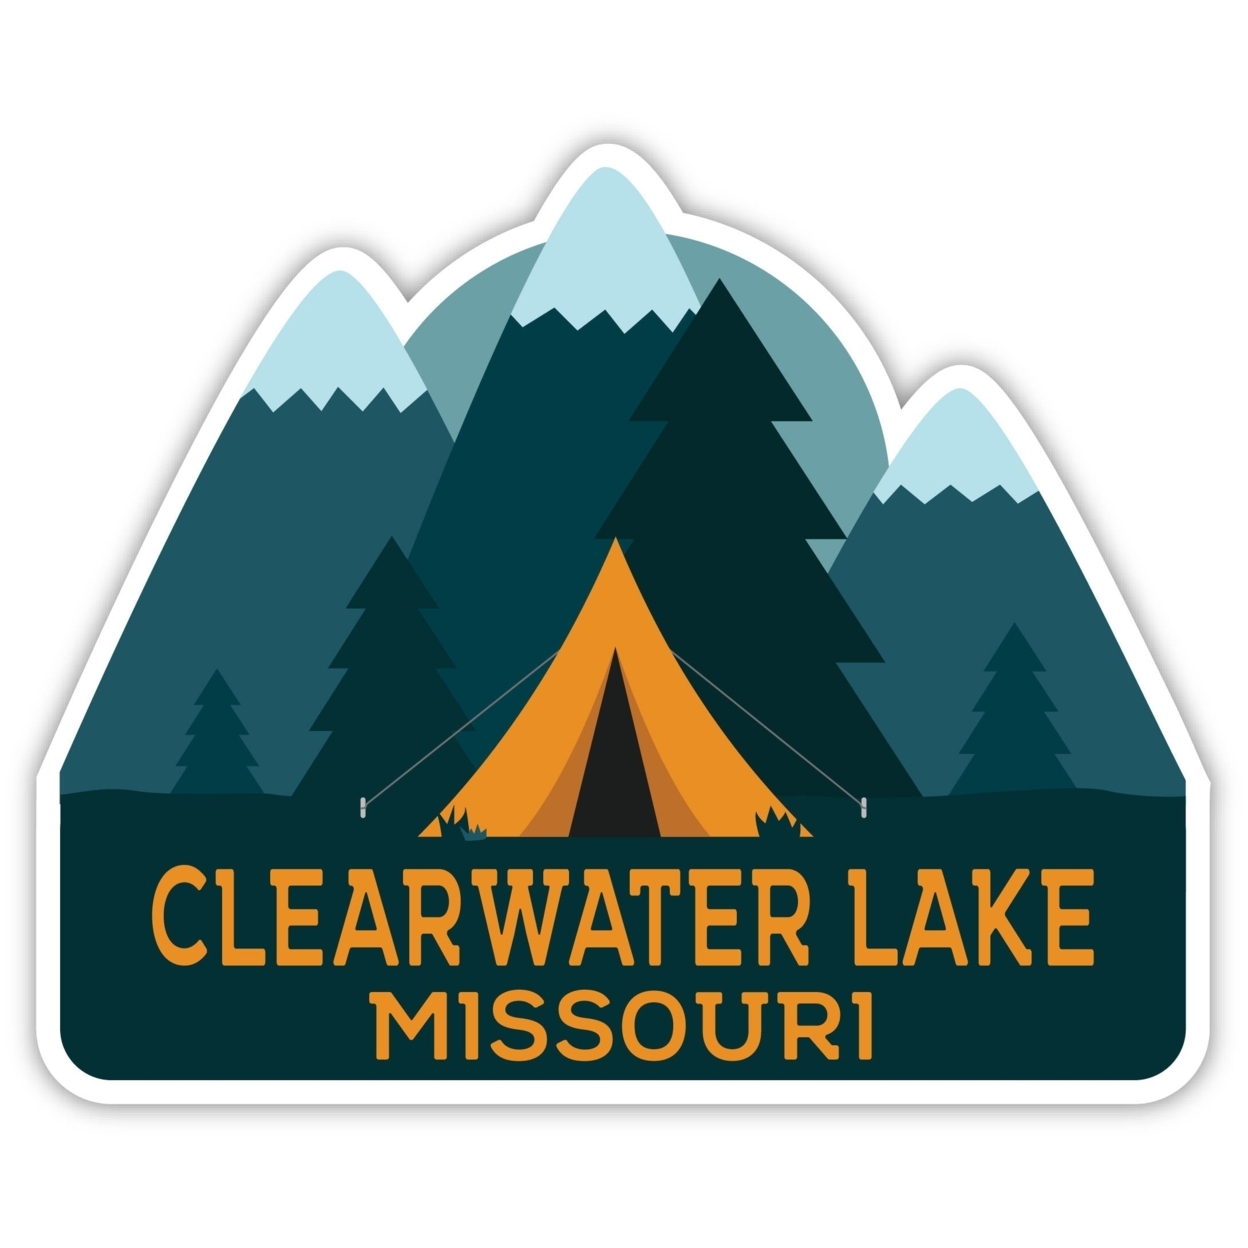 Clearwater Lake Missouri Souvenir Decorative Stickers (Choose Theme And Size) - 4-Pack, 10-Inch, Tent